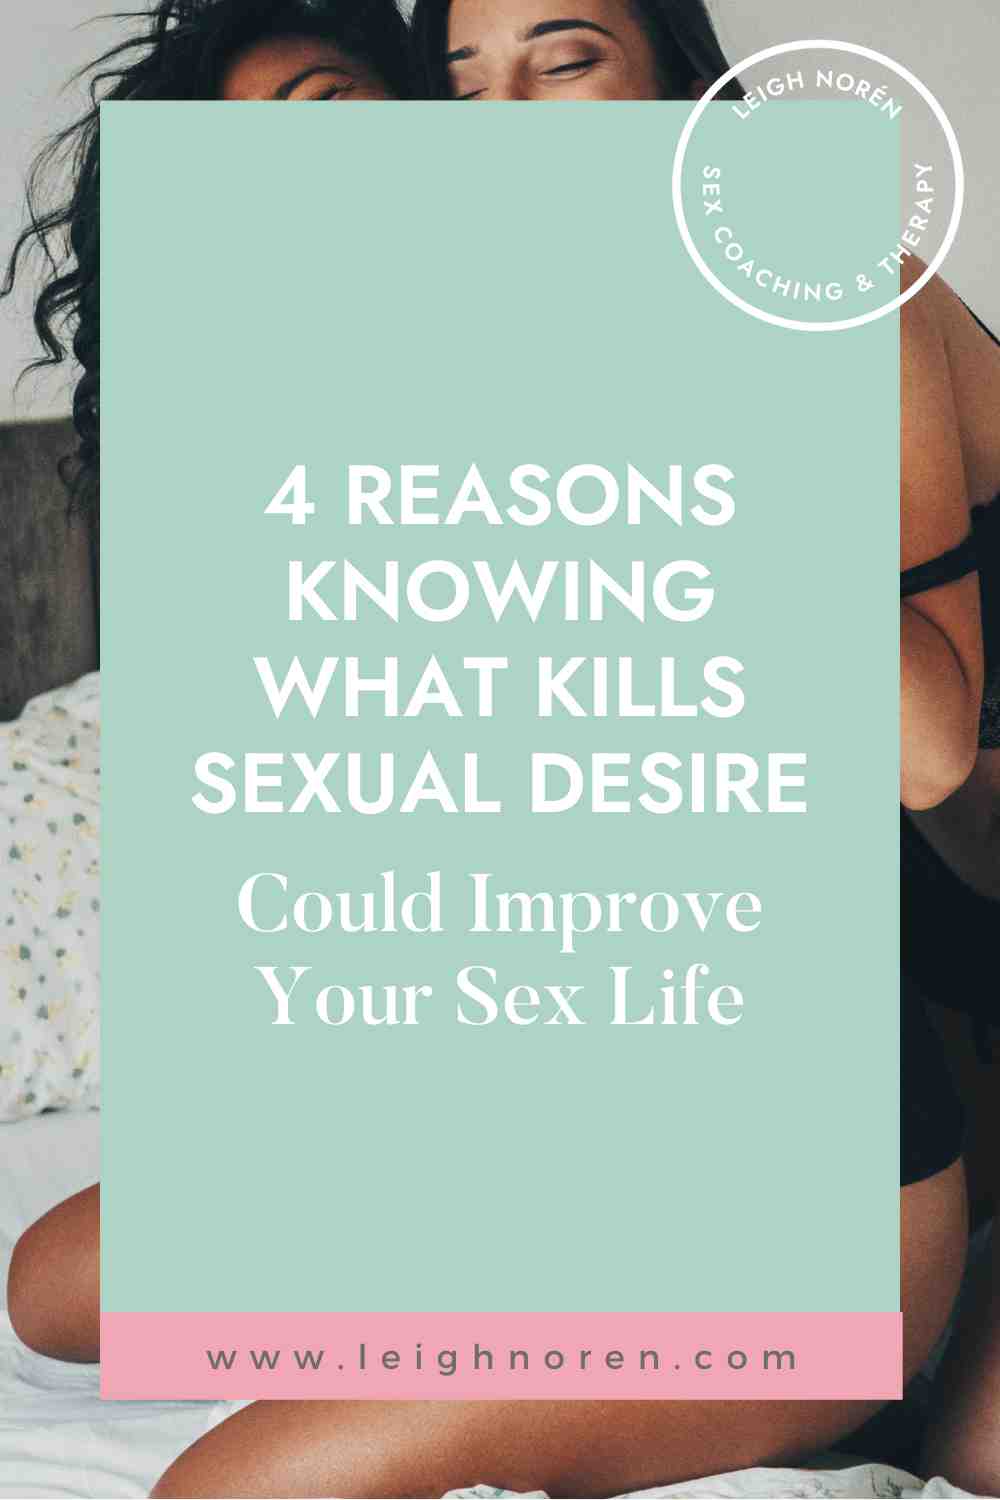 4 Reasons Knowing What Kills Sexual Desire Could Improve Your Sex Life